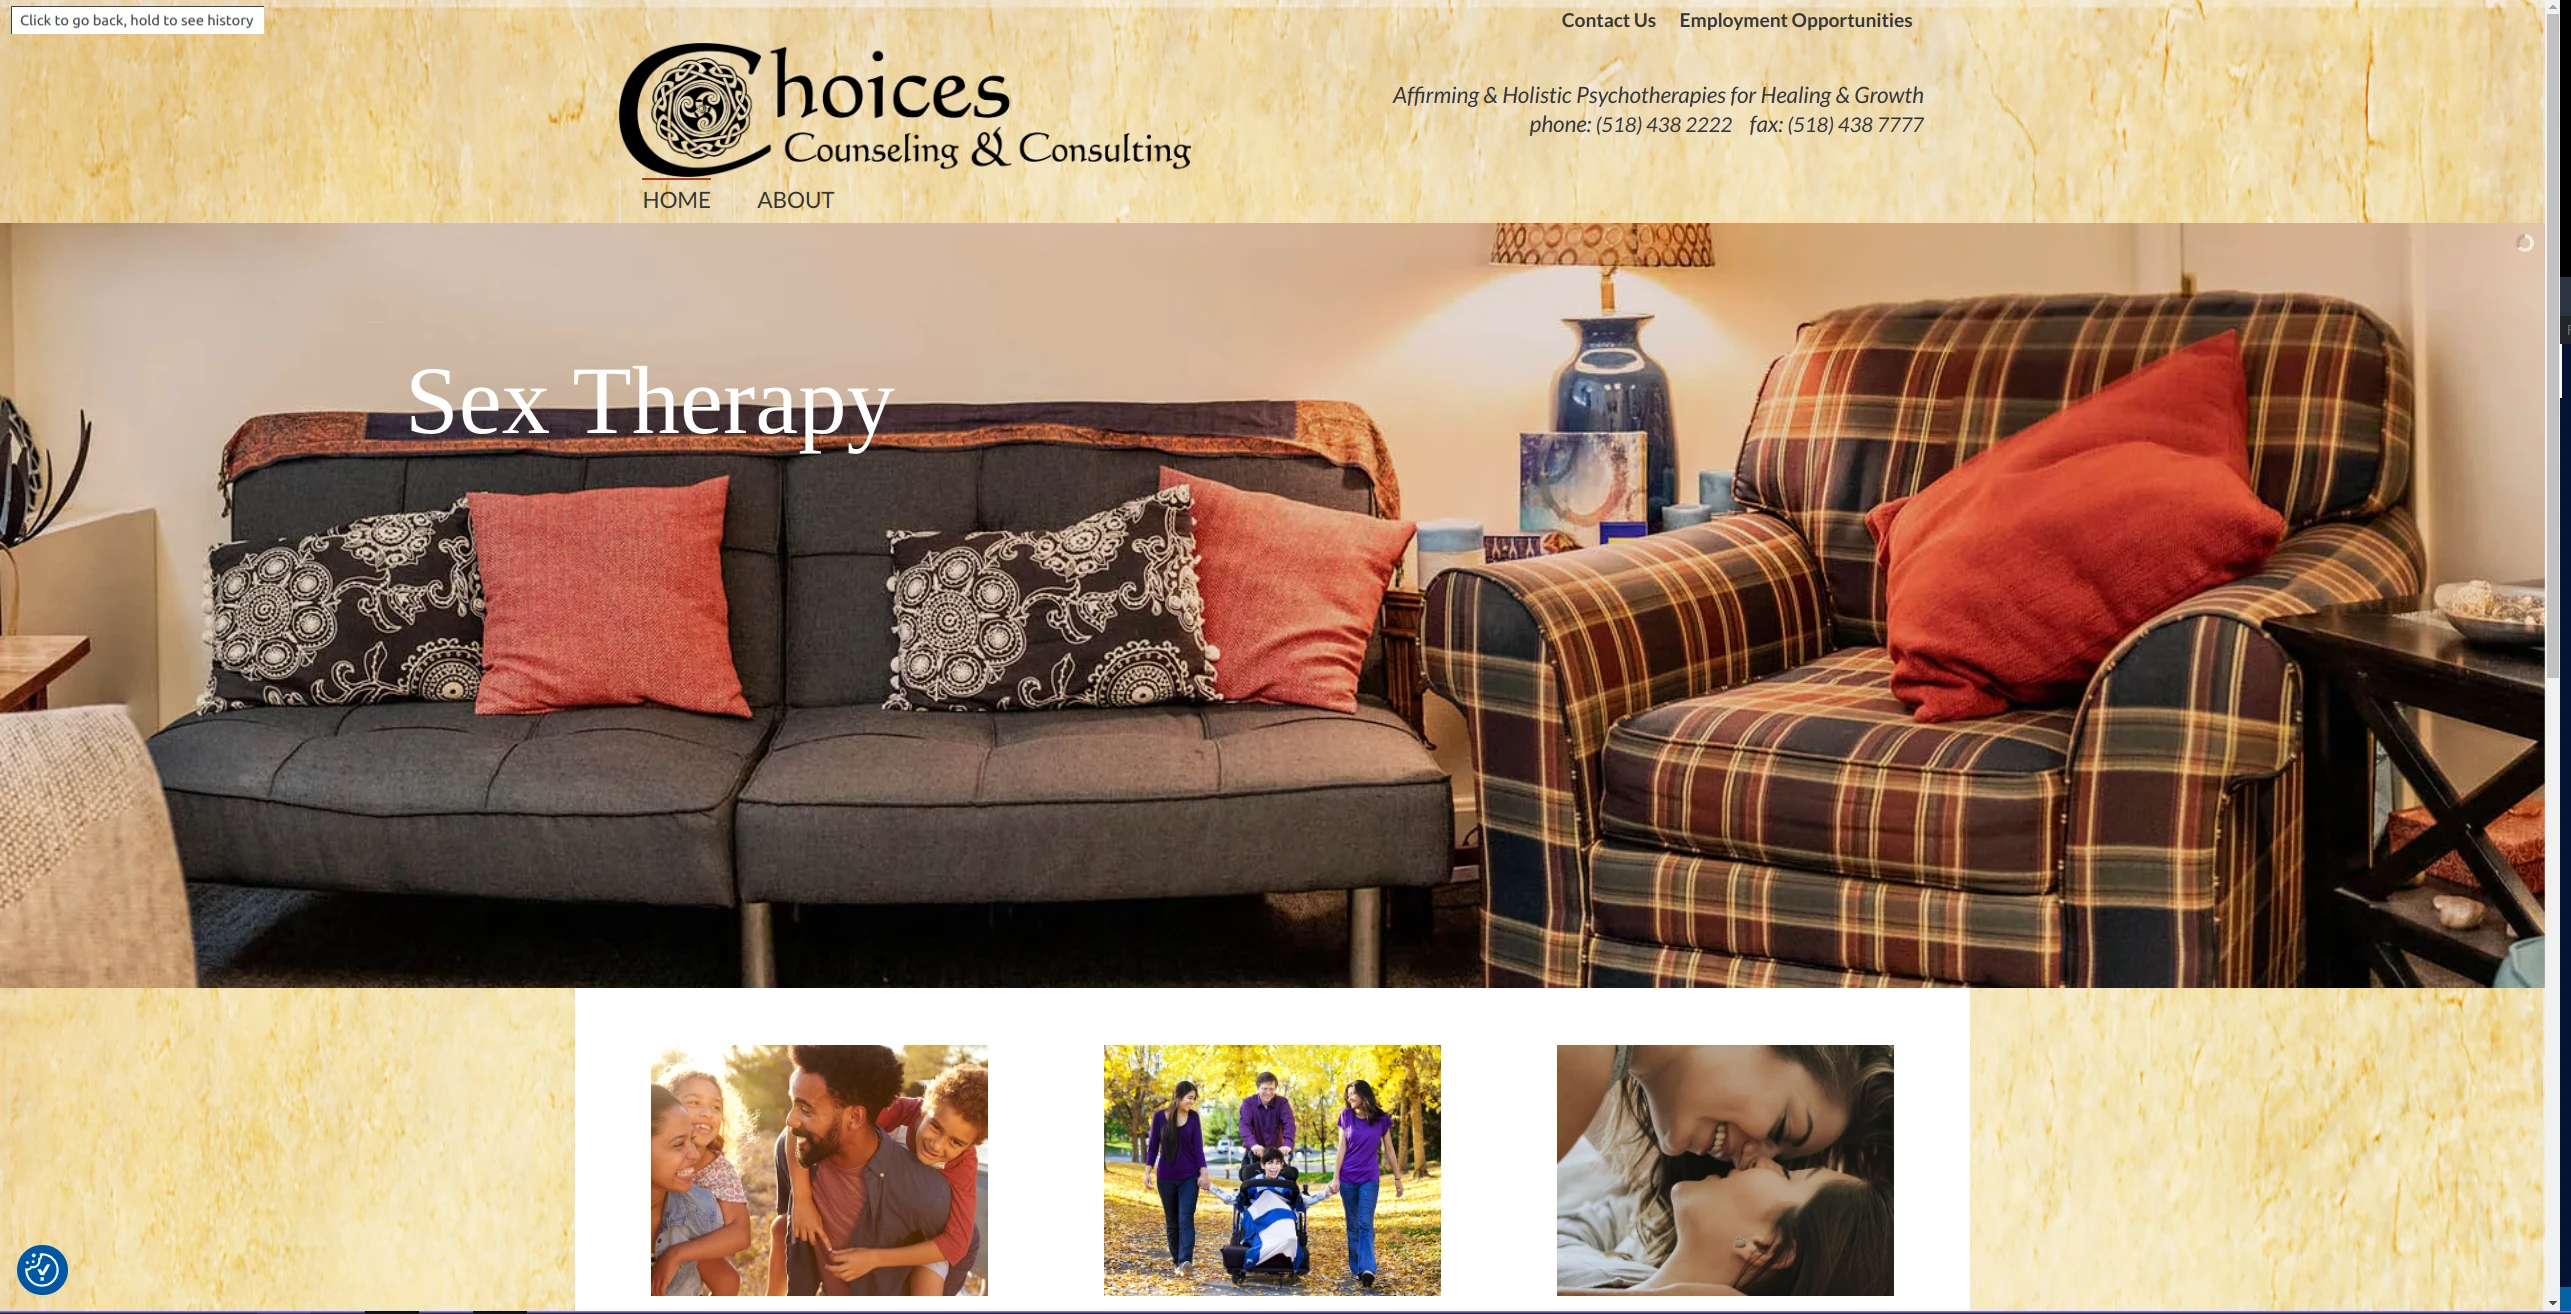 Choices Counseling and consulting website image